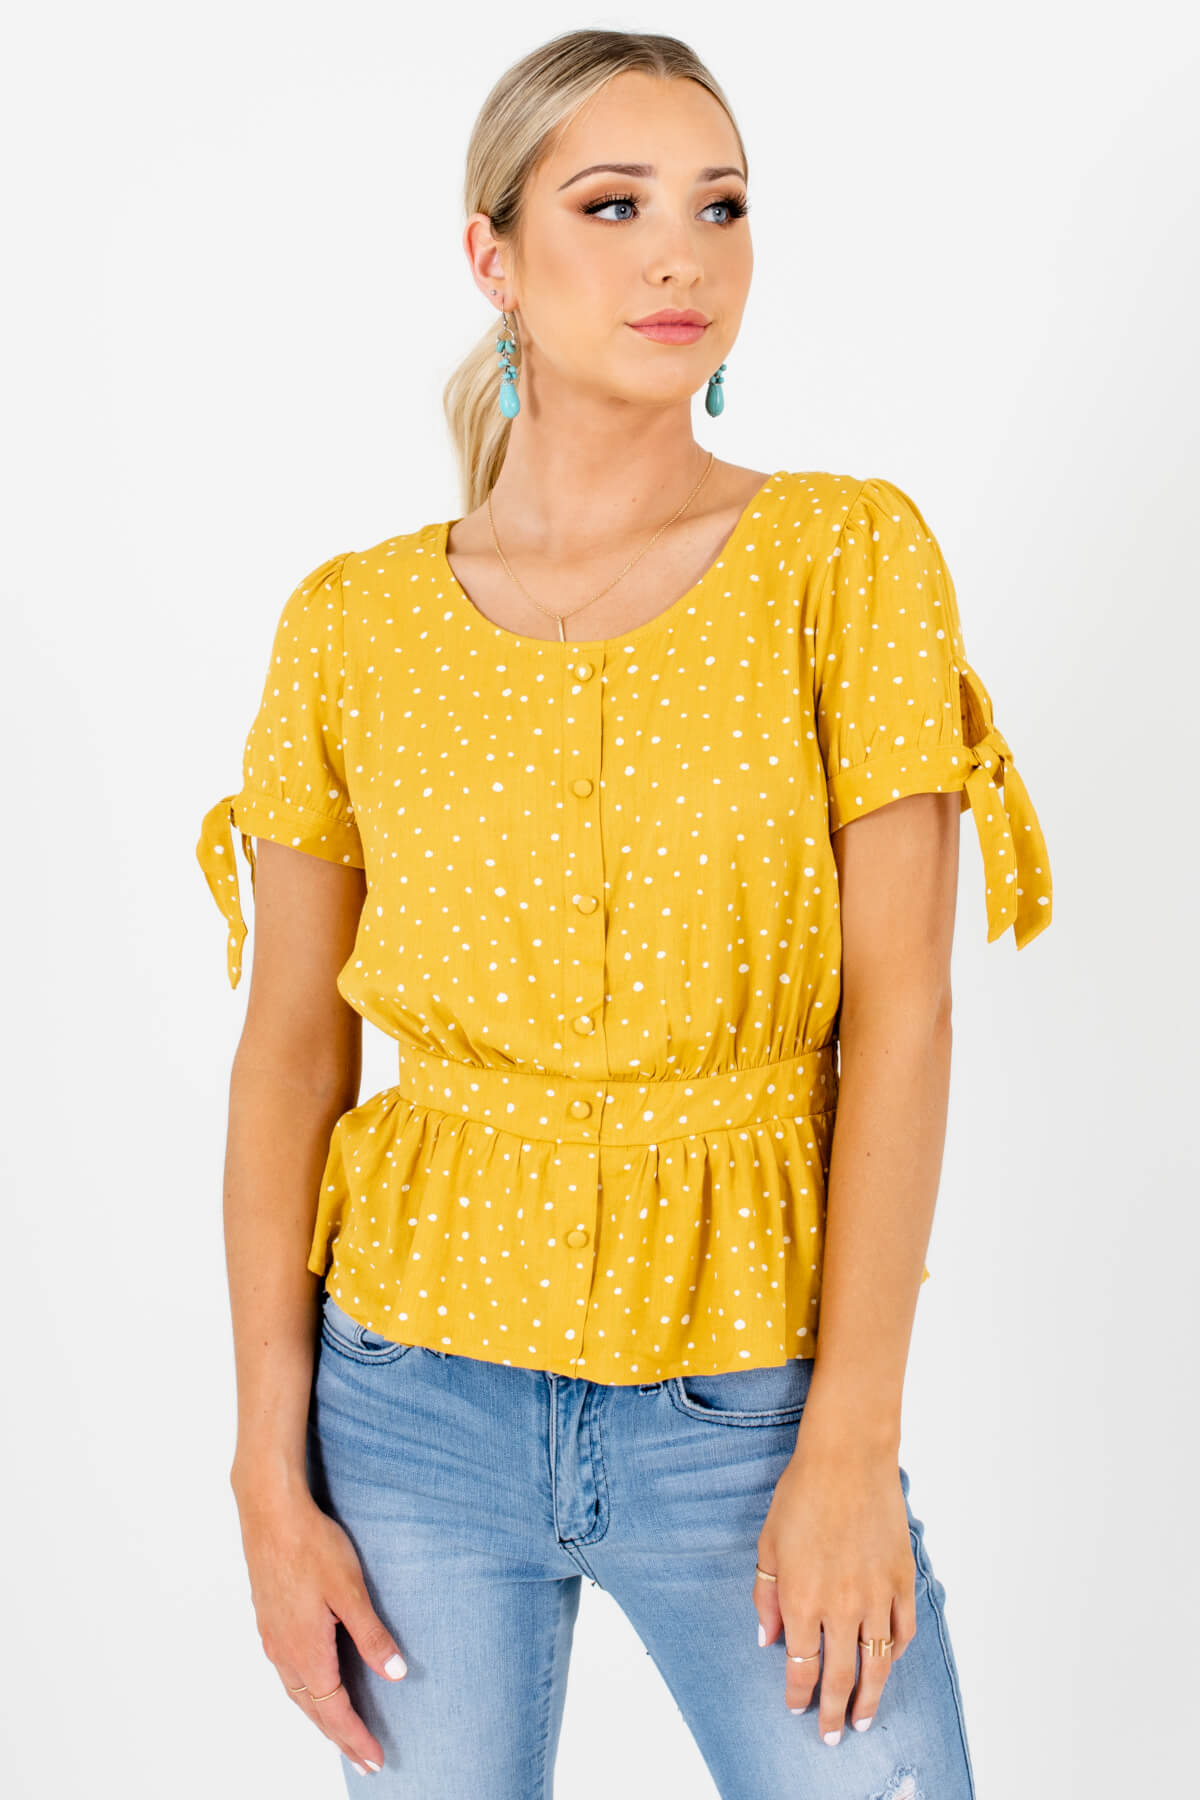 Mustard Yellow and White Polka Dot Patterned Boutique Tops for Women